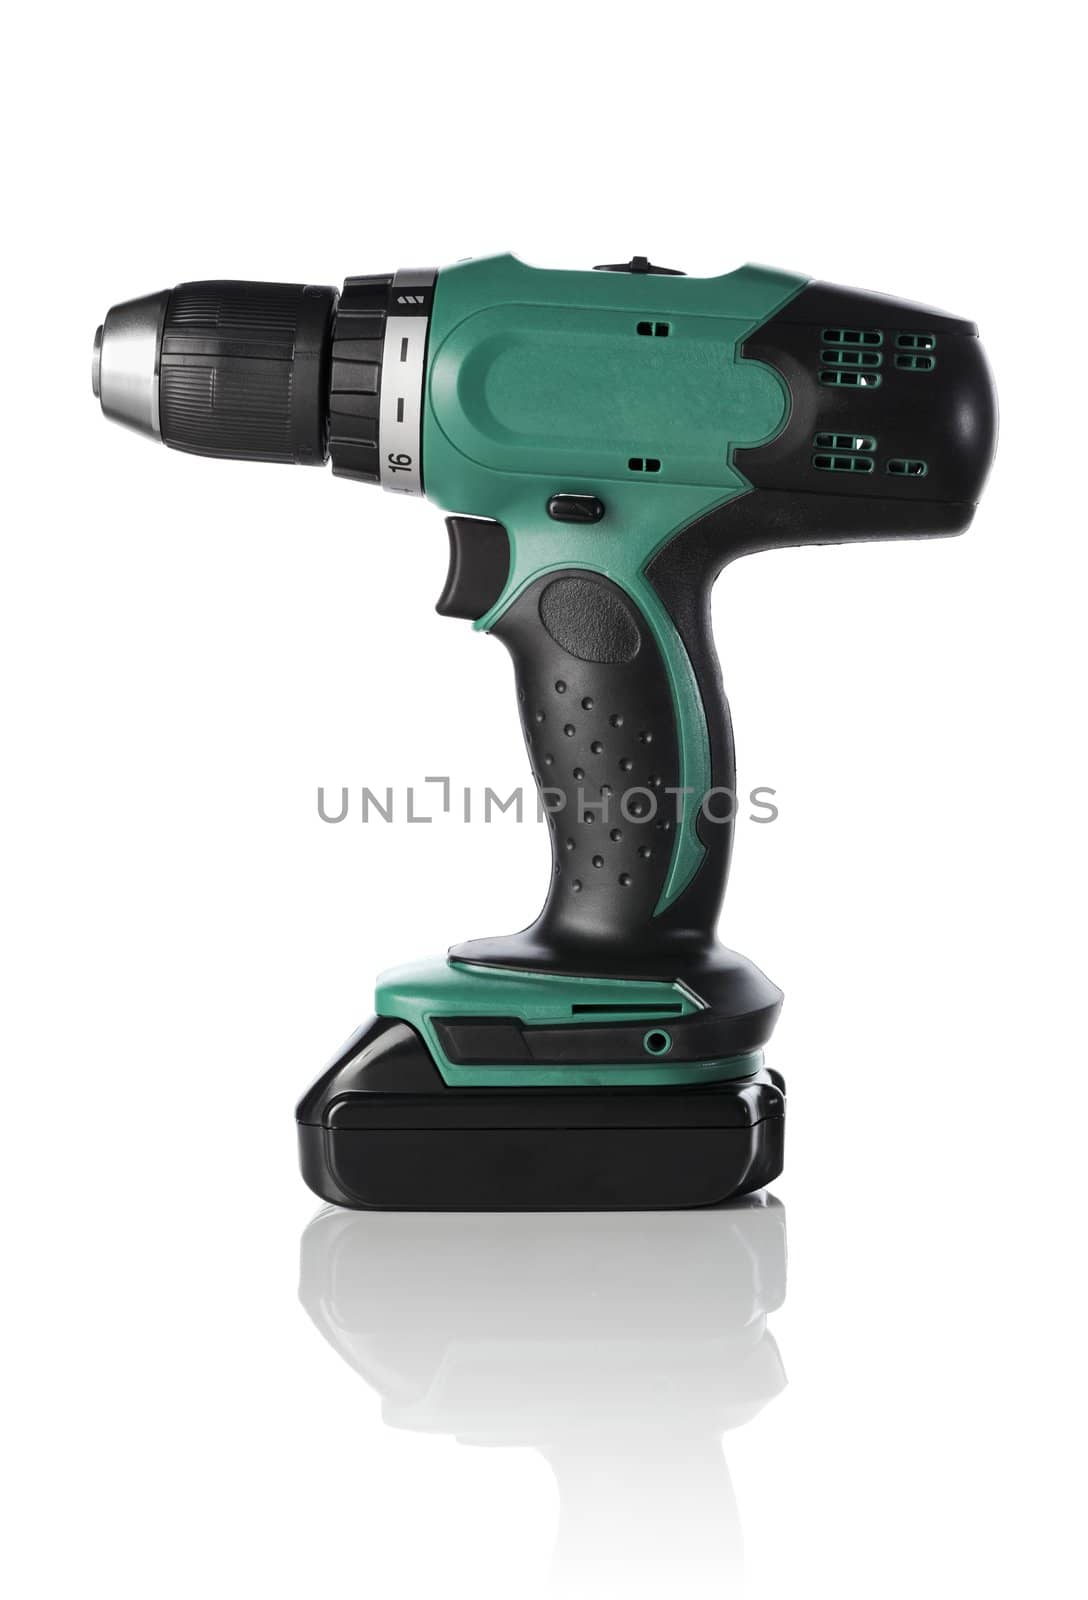 Professional grade battery-powered cordless electric drill.